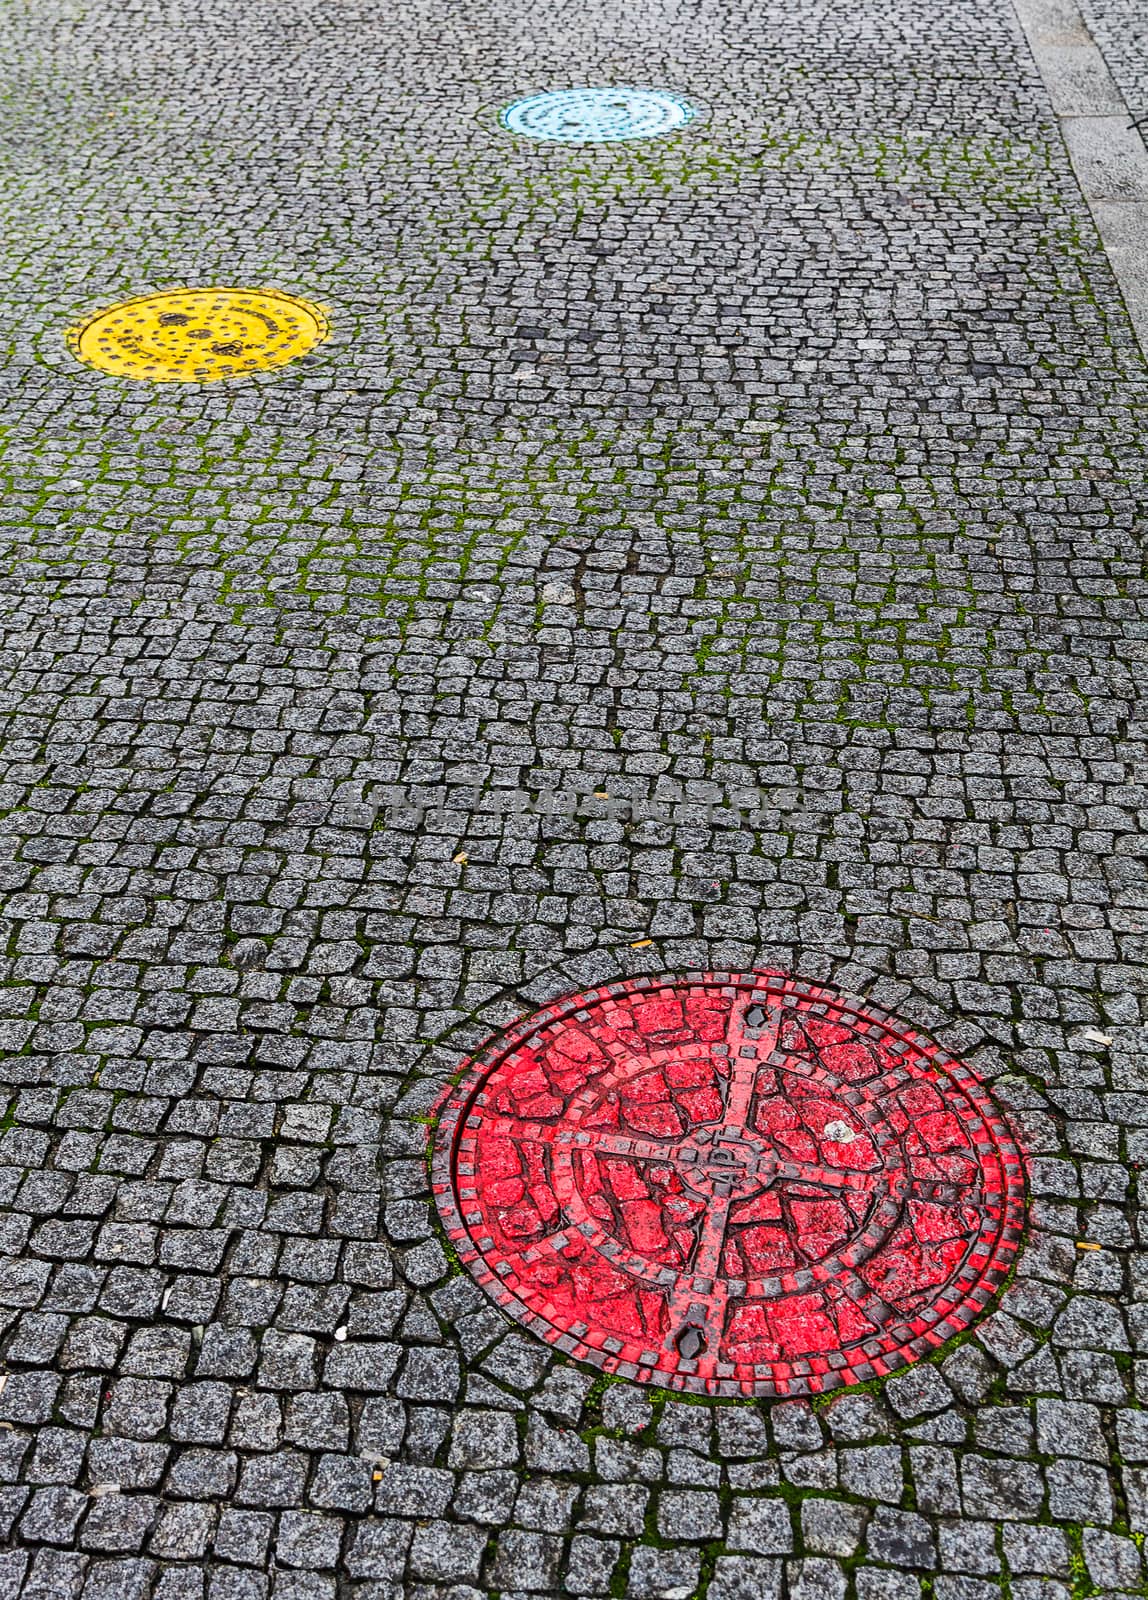 Pavement with colorful sewer covers in Porto, Portugal by JRPazos